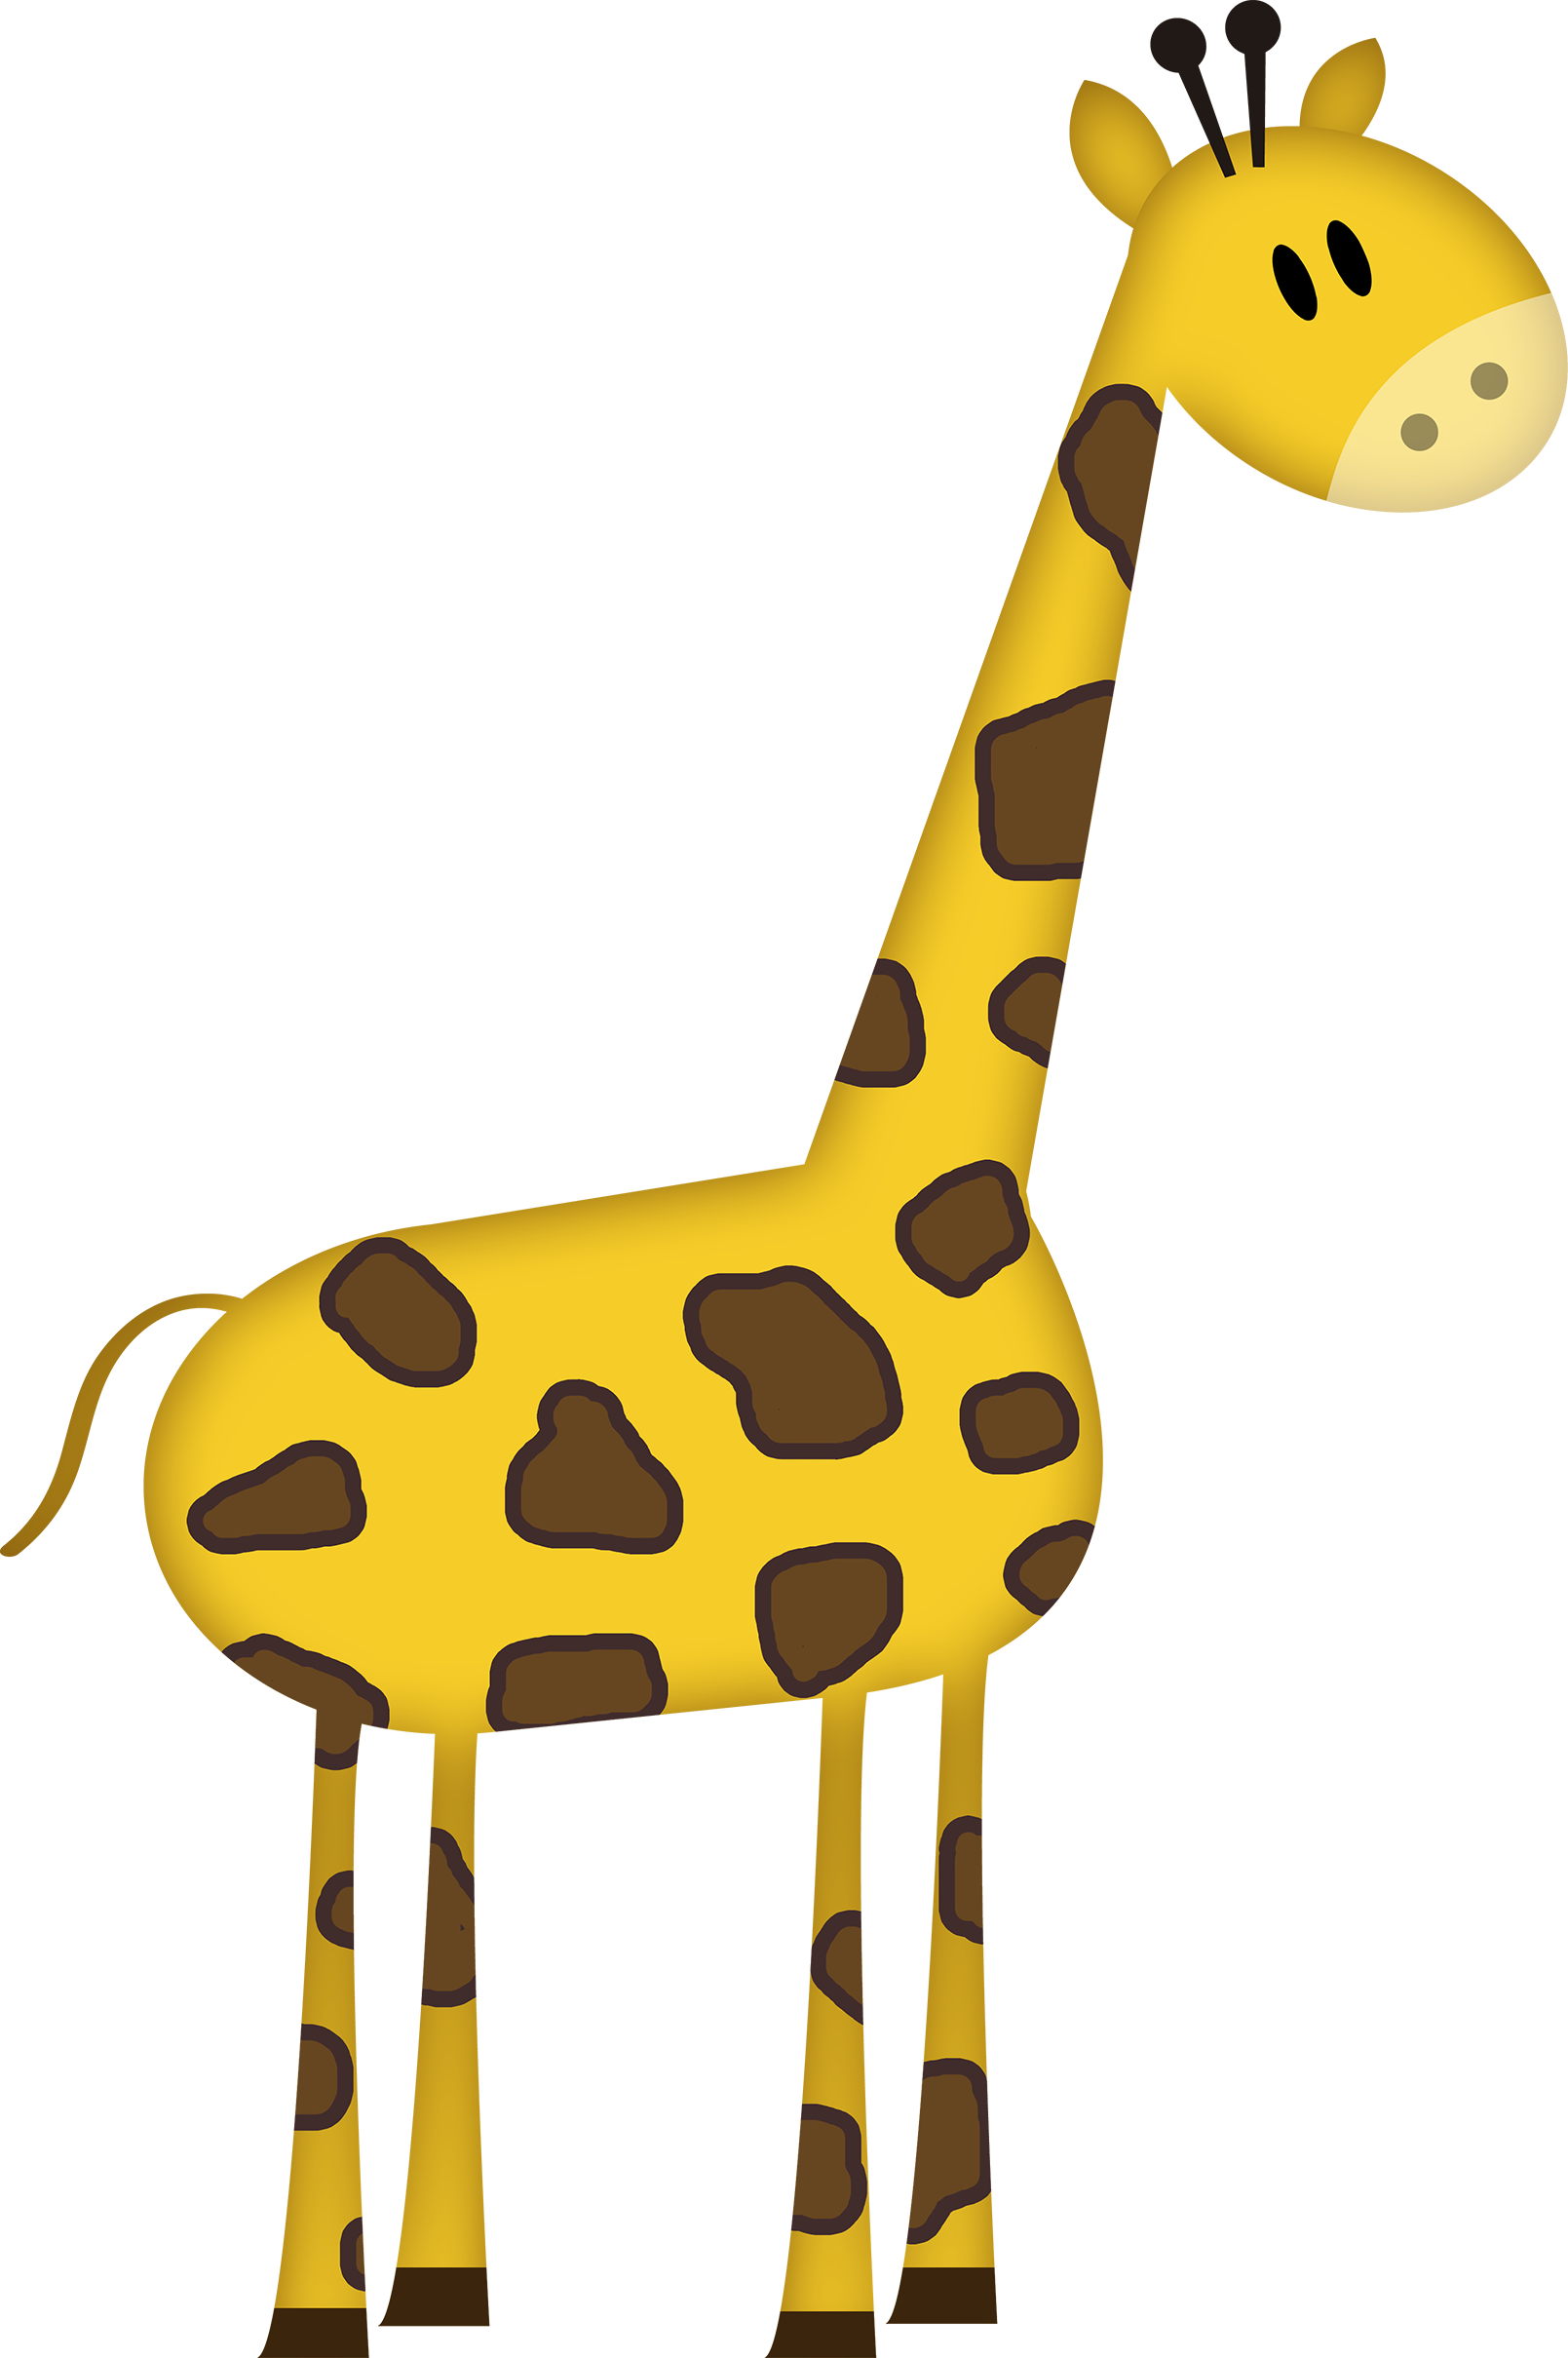 Pin By Lena Forbis On Clip Art And Printables - Giraffe (1609x2419)